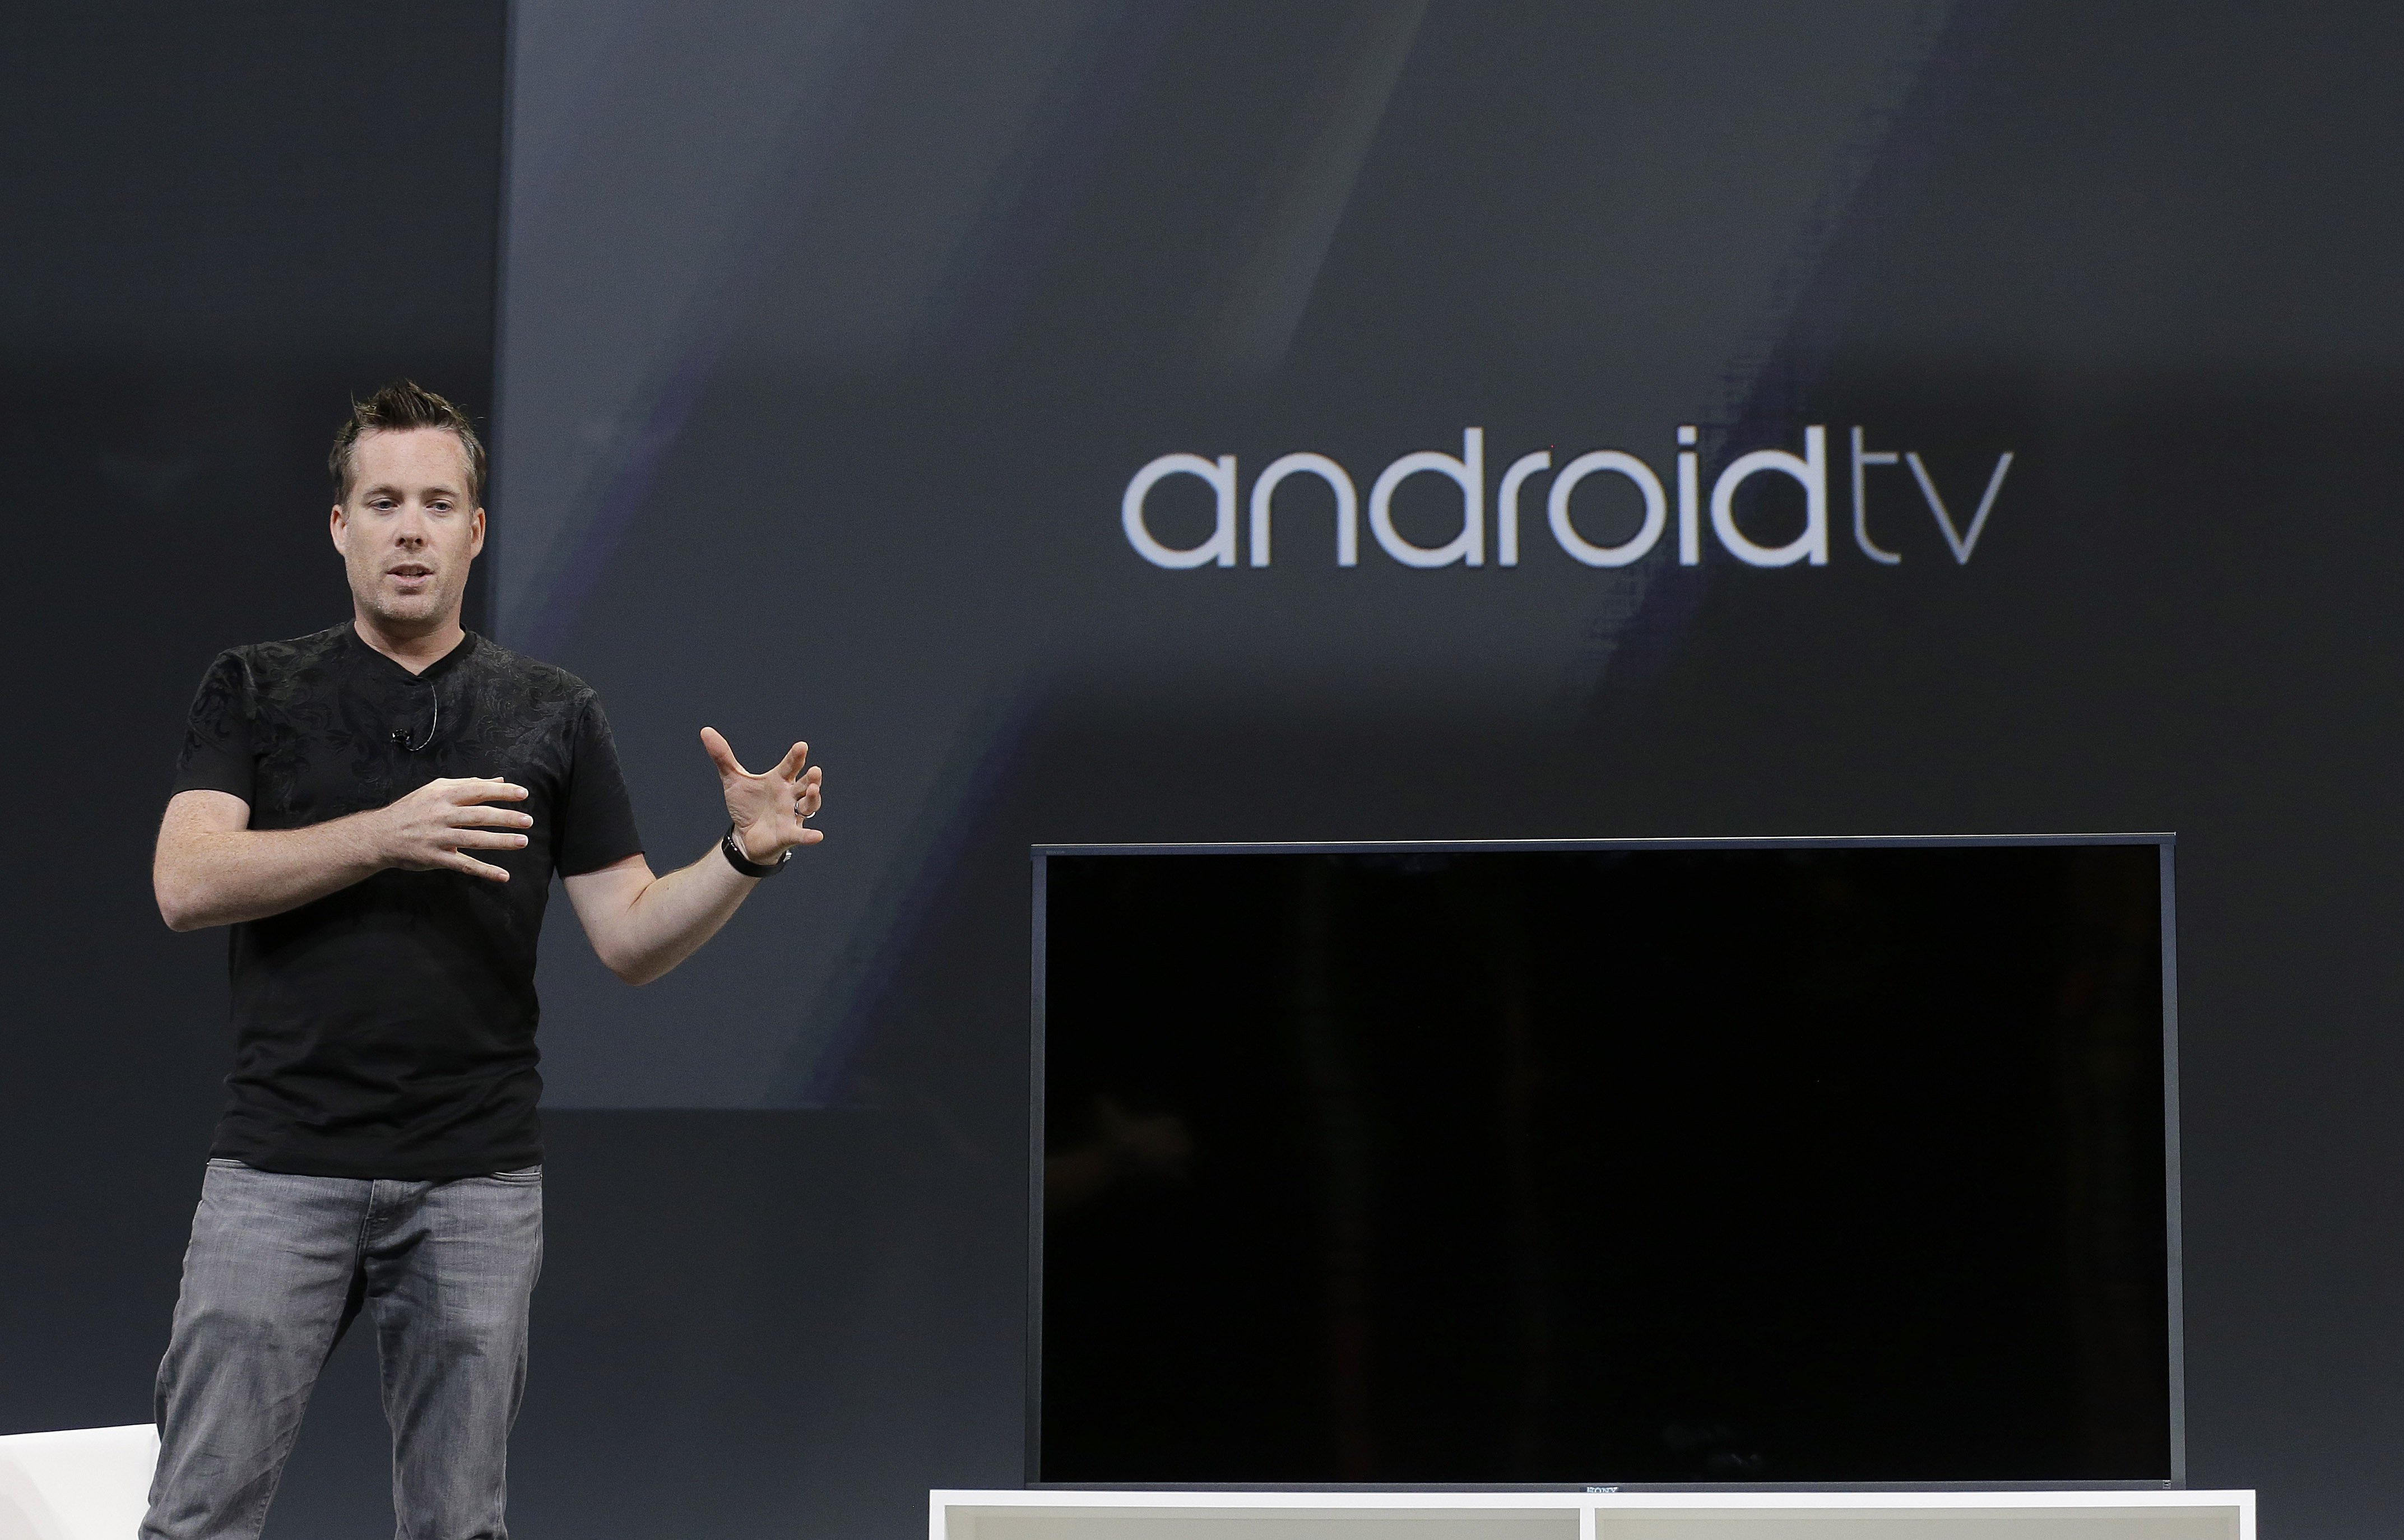 Dave Burke, director of engineering at Android, speaks about Android TV during the Google I/O 2014 keynote presentation in San Francisco on  June 25, 2014. (Jeff Chiu—AP)